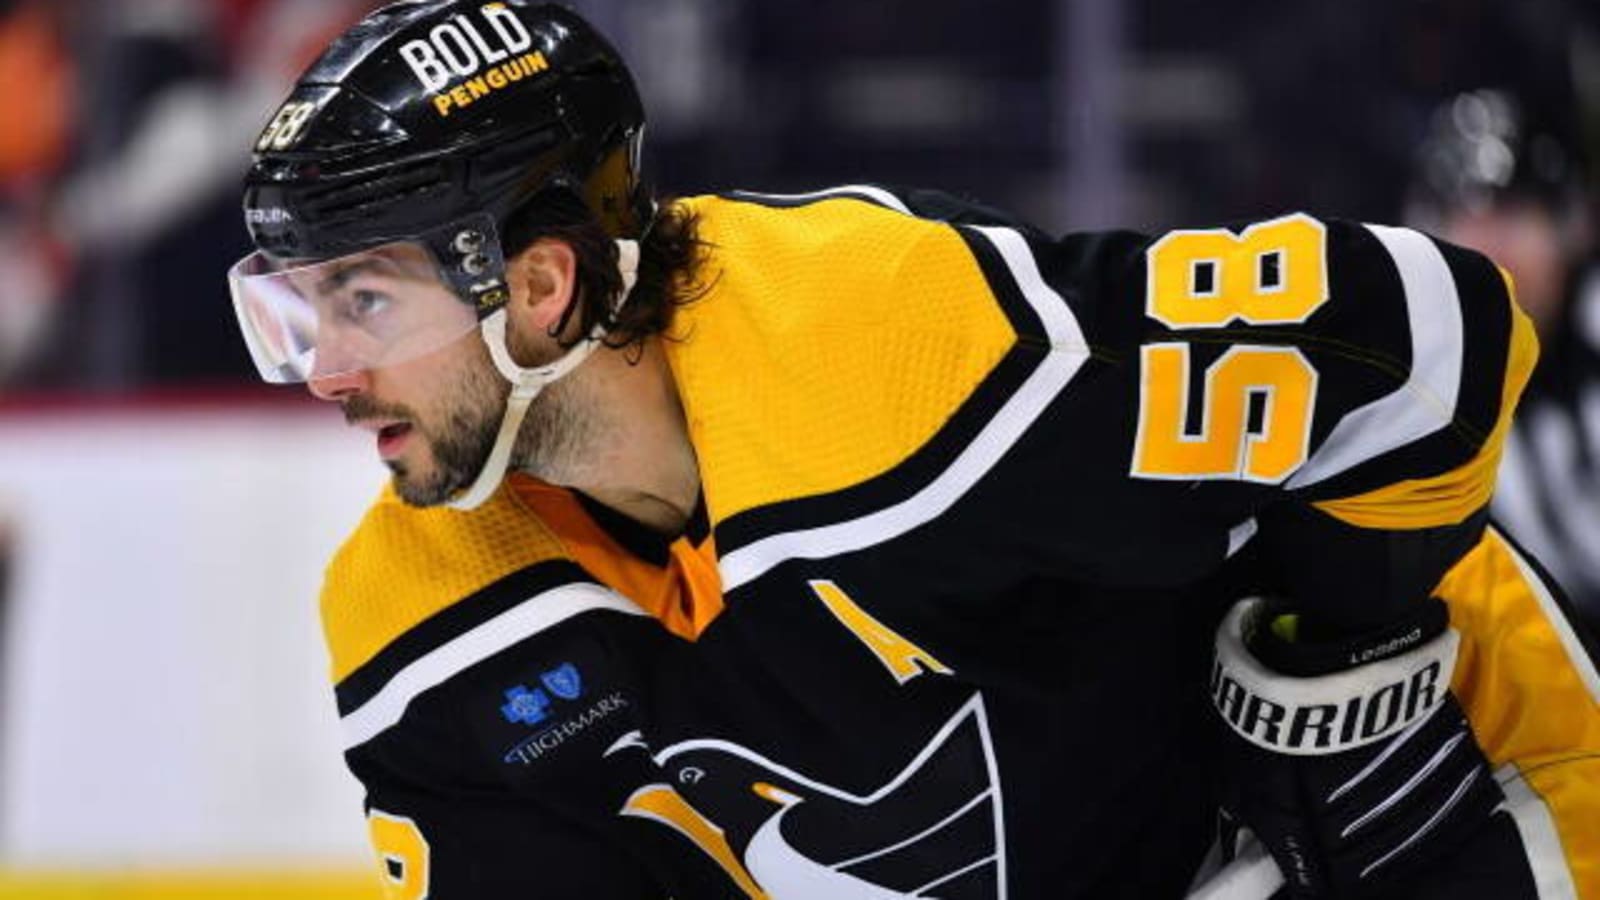 NHL News: Kris Letang expected to be able to continue playing hockey after his second stroke